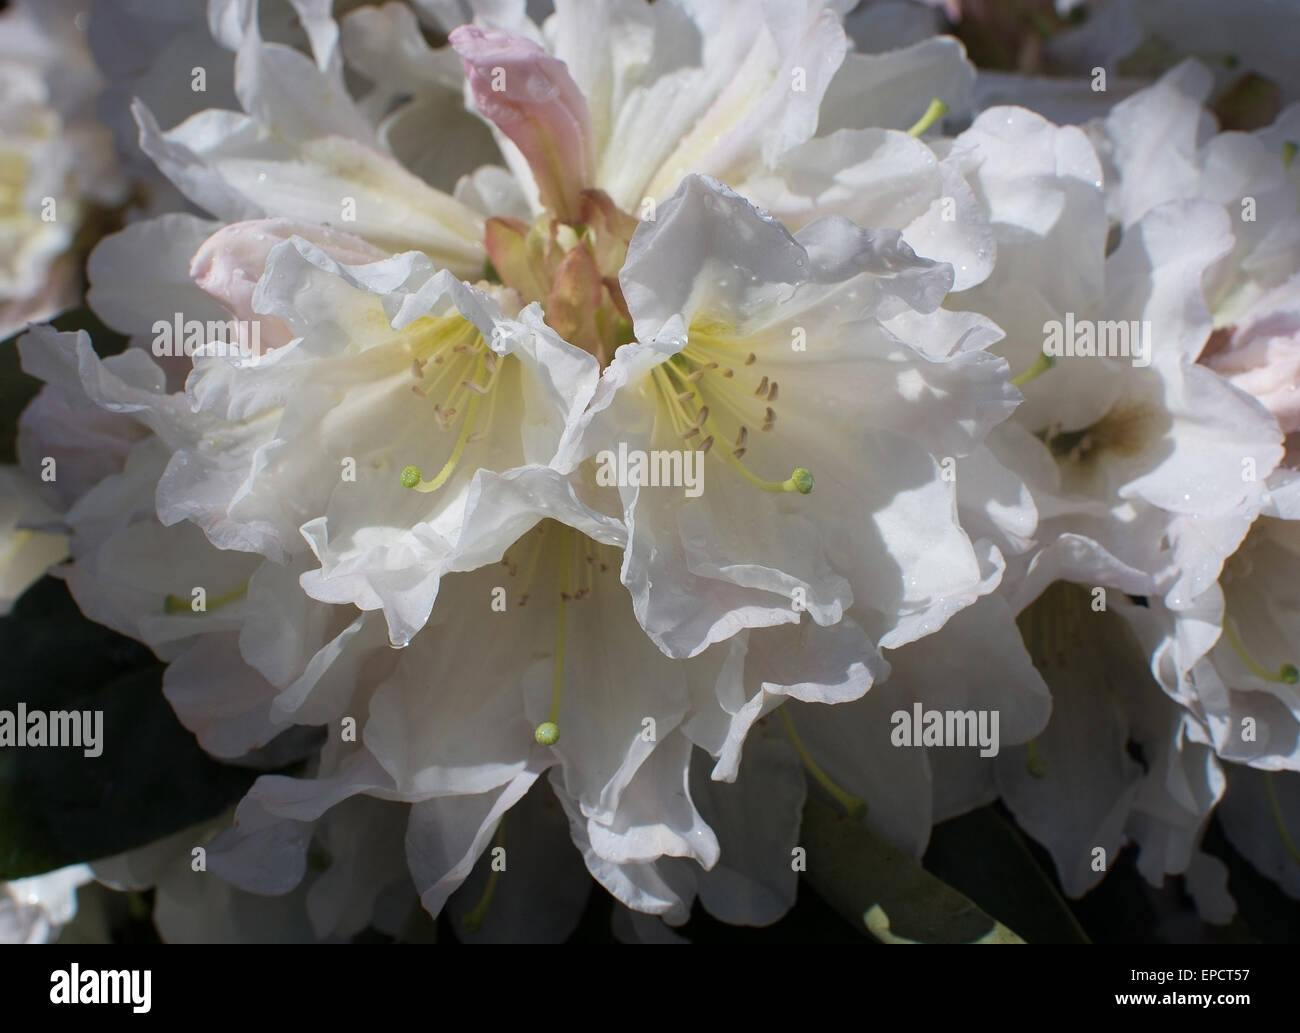 White rhododendron flower closeup with petals and pistils in May. Stock Photo